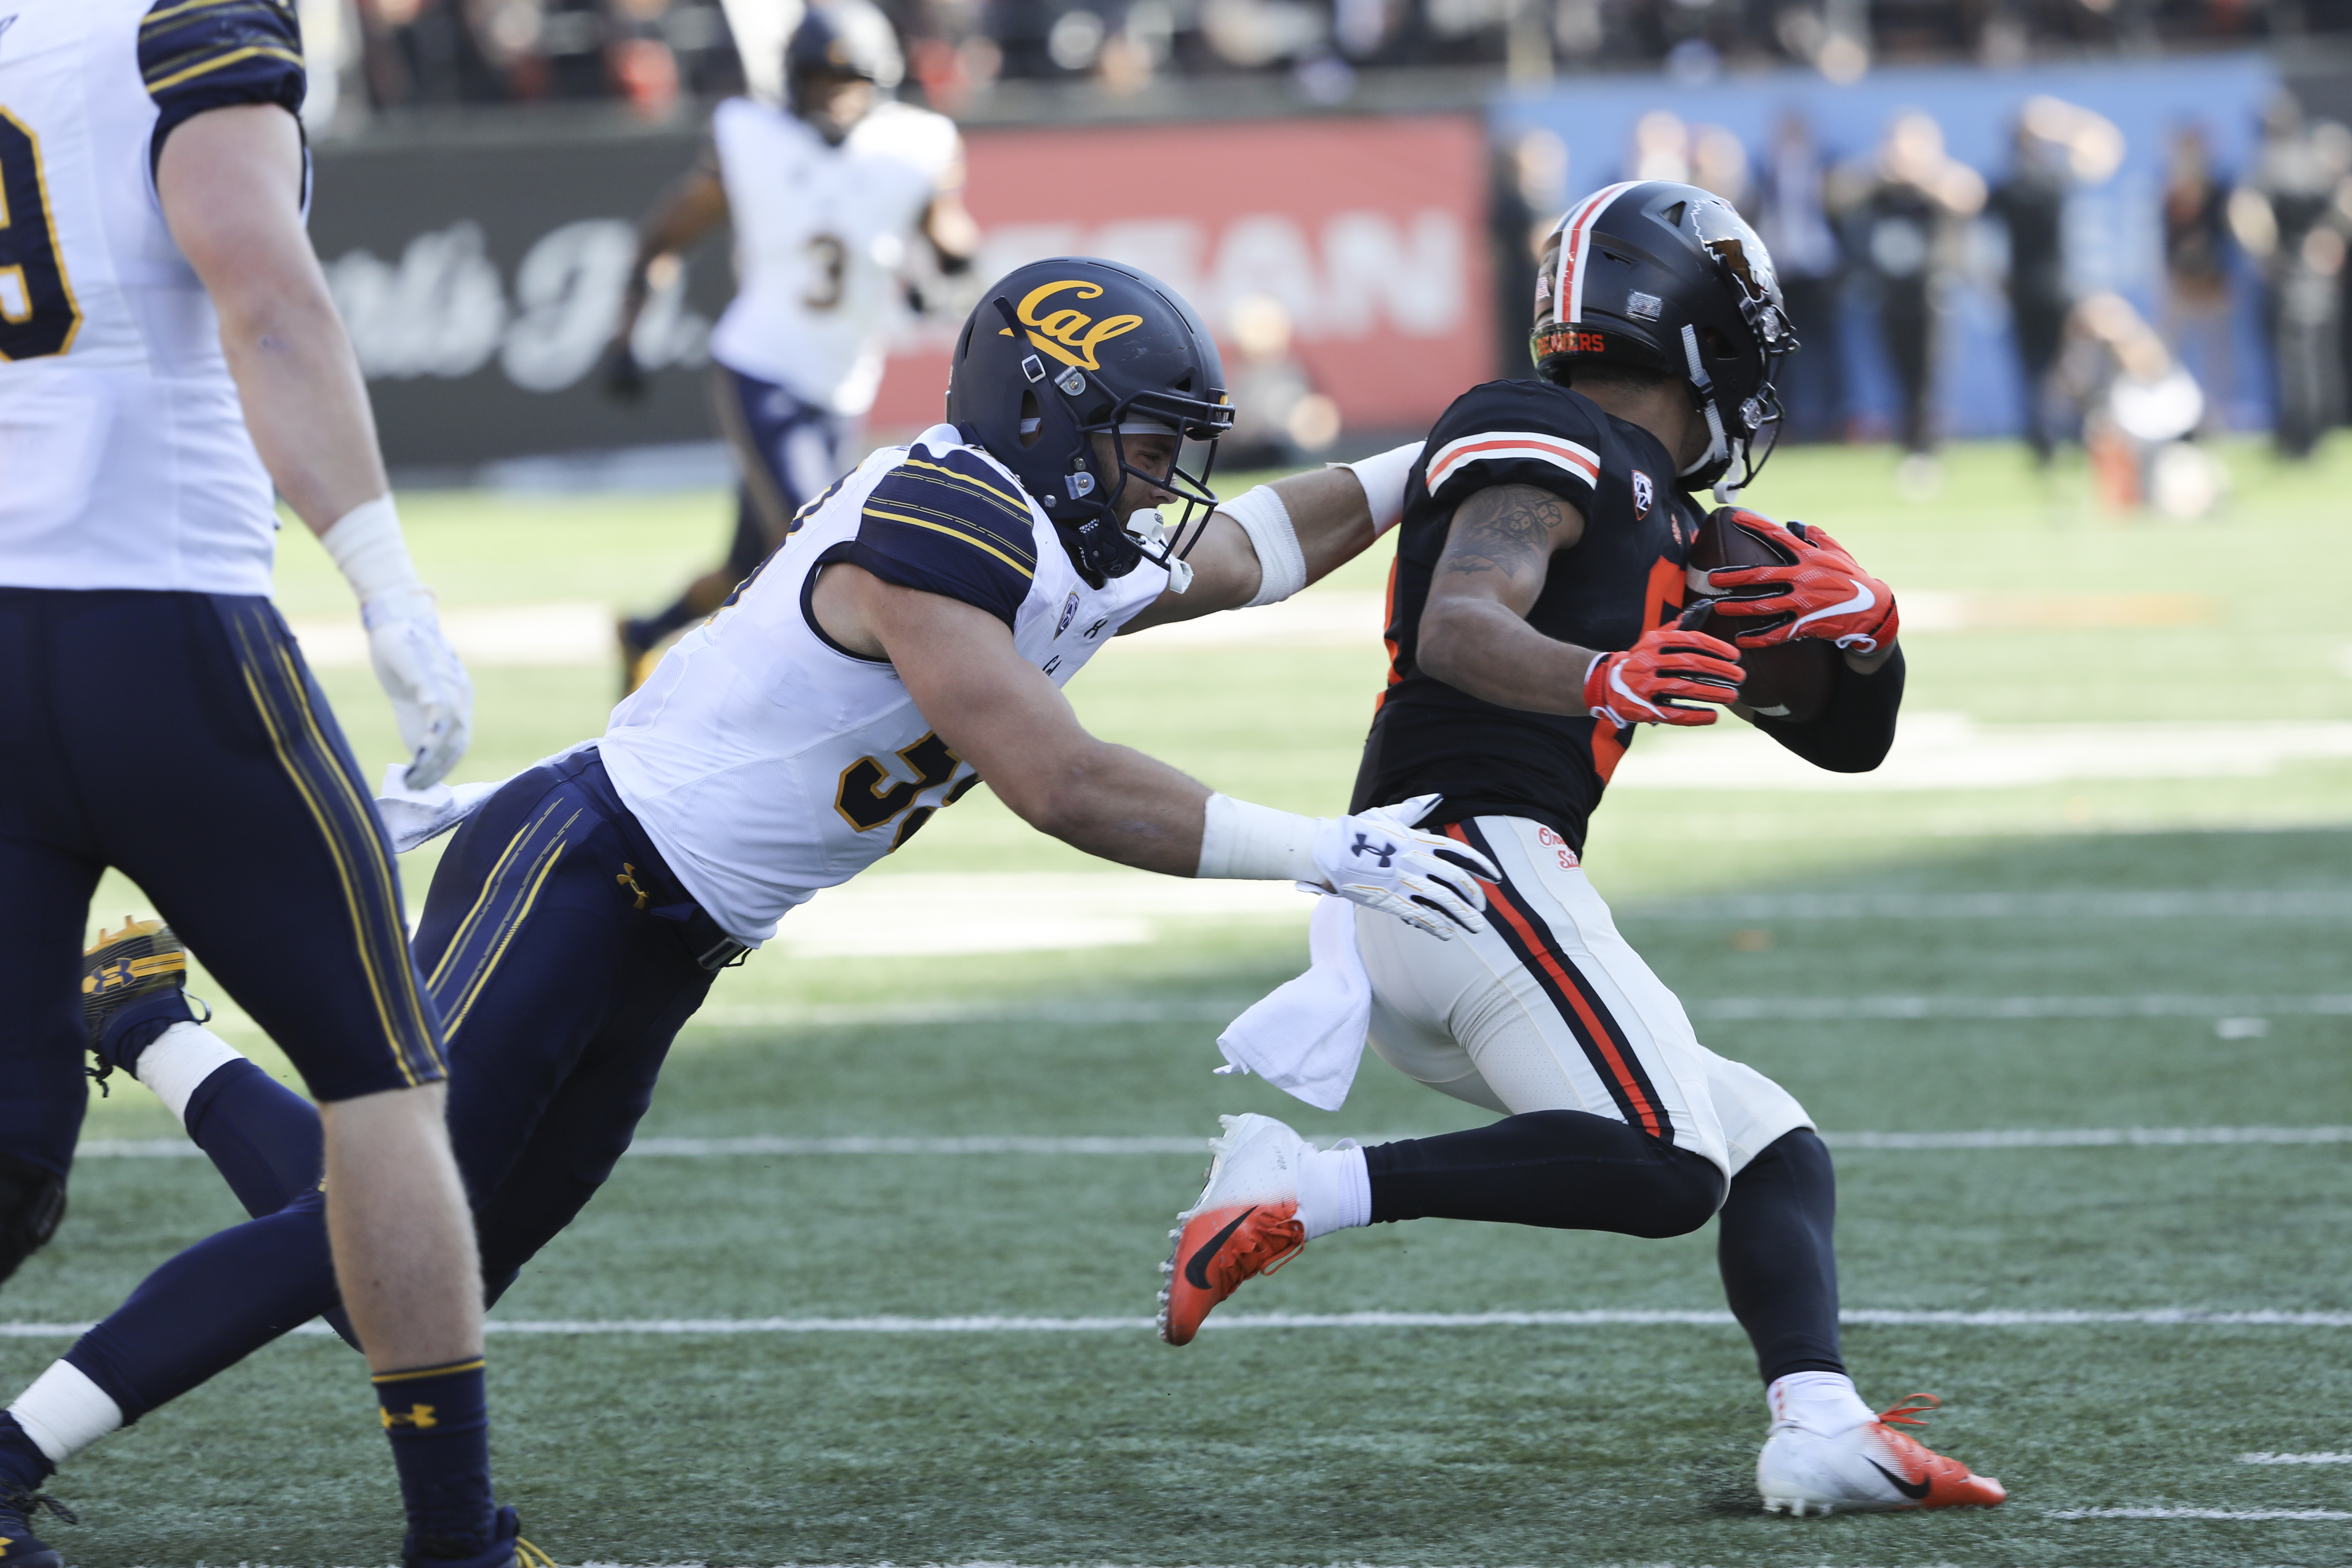 Laird has 3 TDs runs in 49-7 Cal win over Oregon State